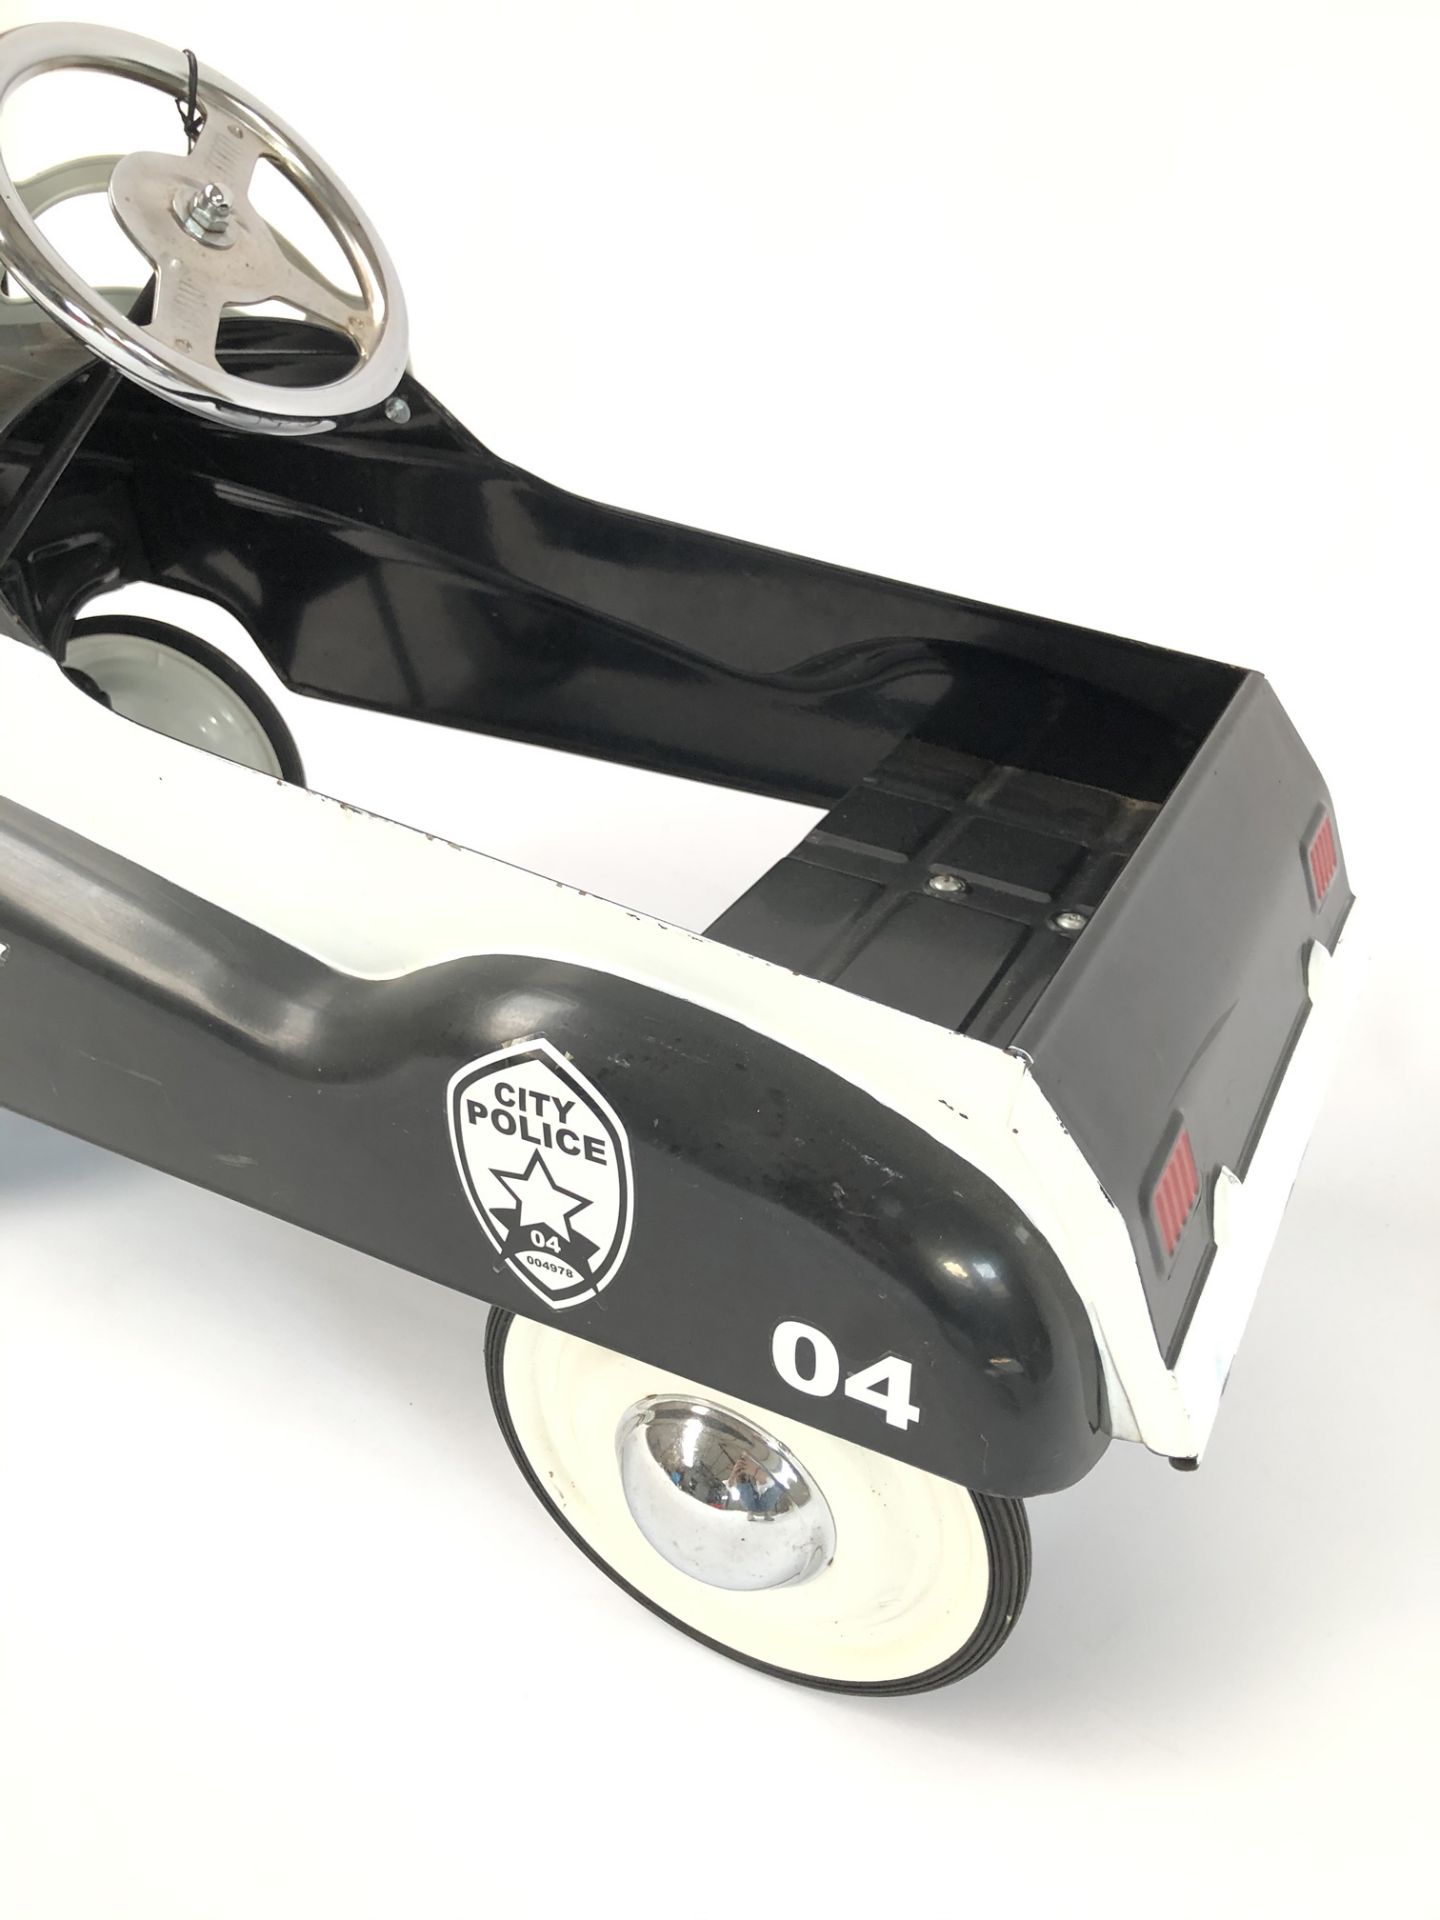 Reproduction Children's Metal Police Pedal Car - Image 4 of 4